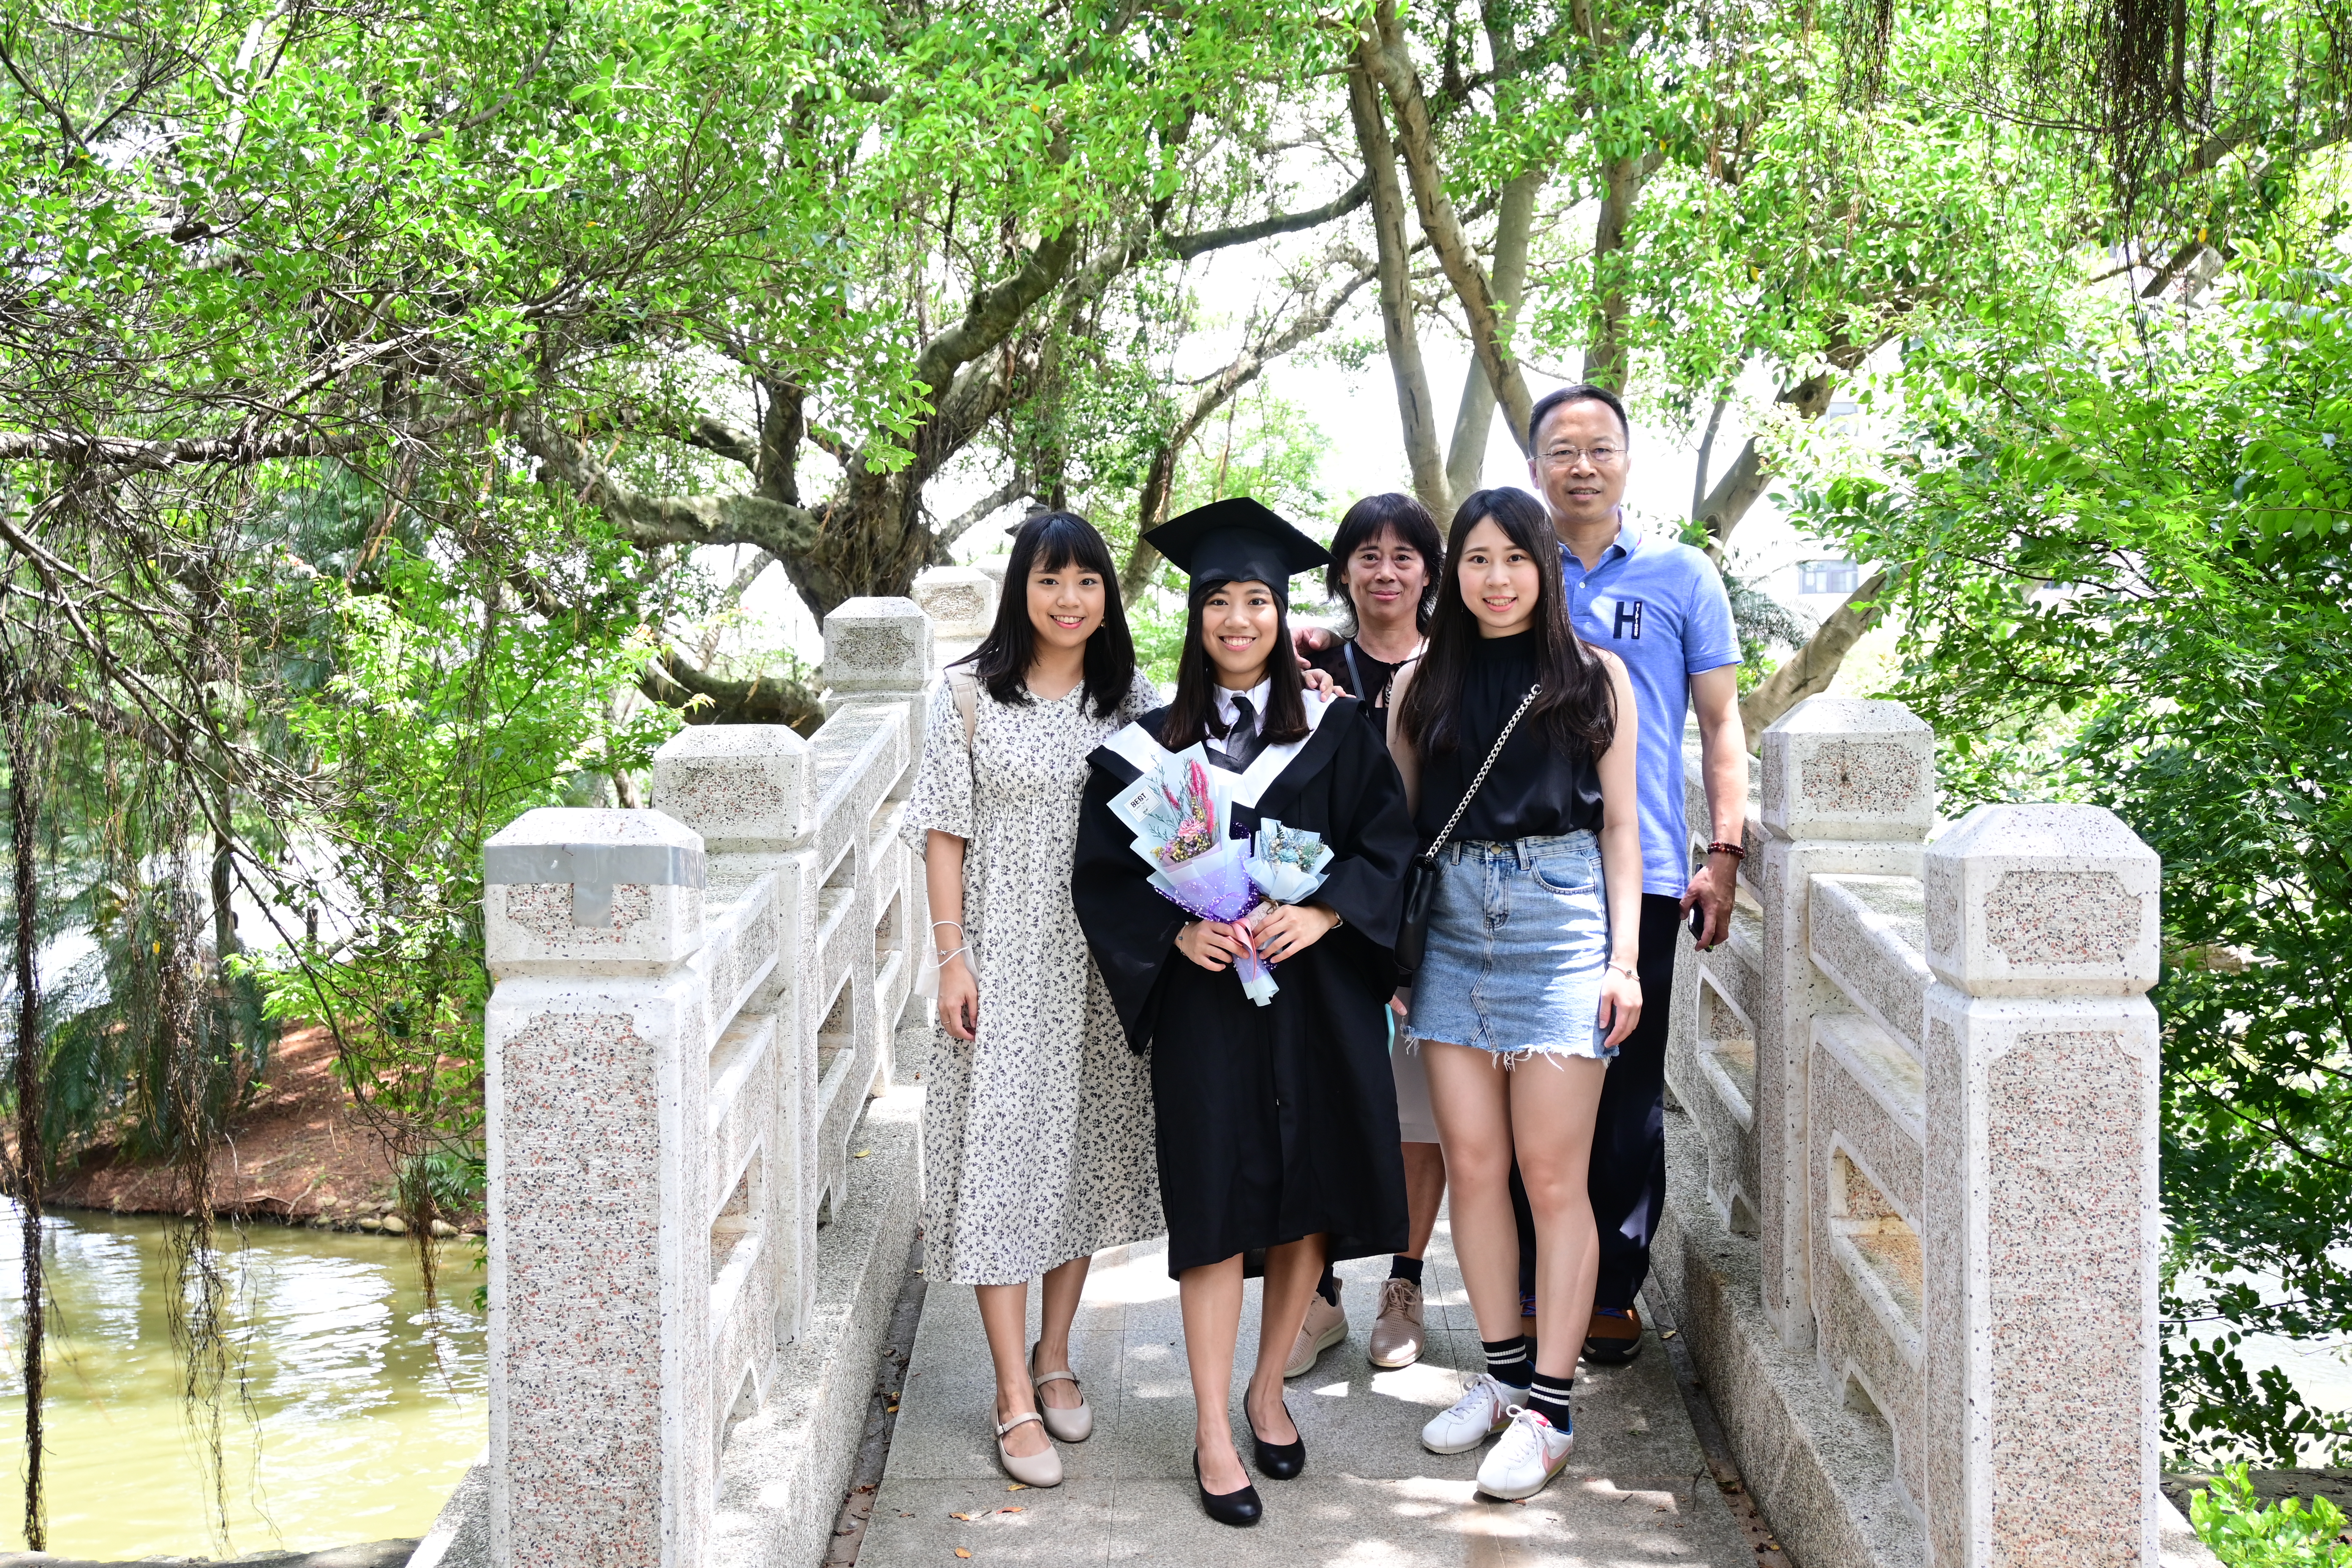 wearing bachelor gown with my family